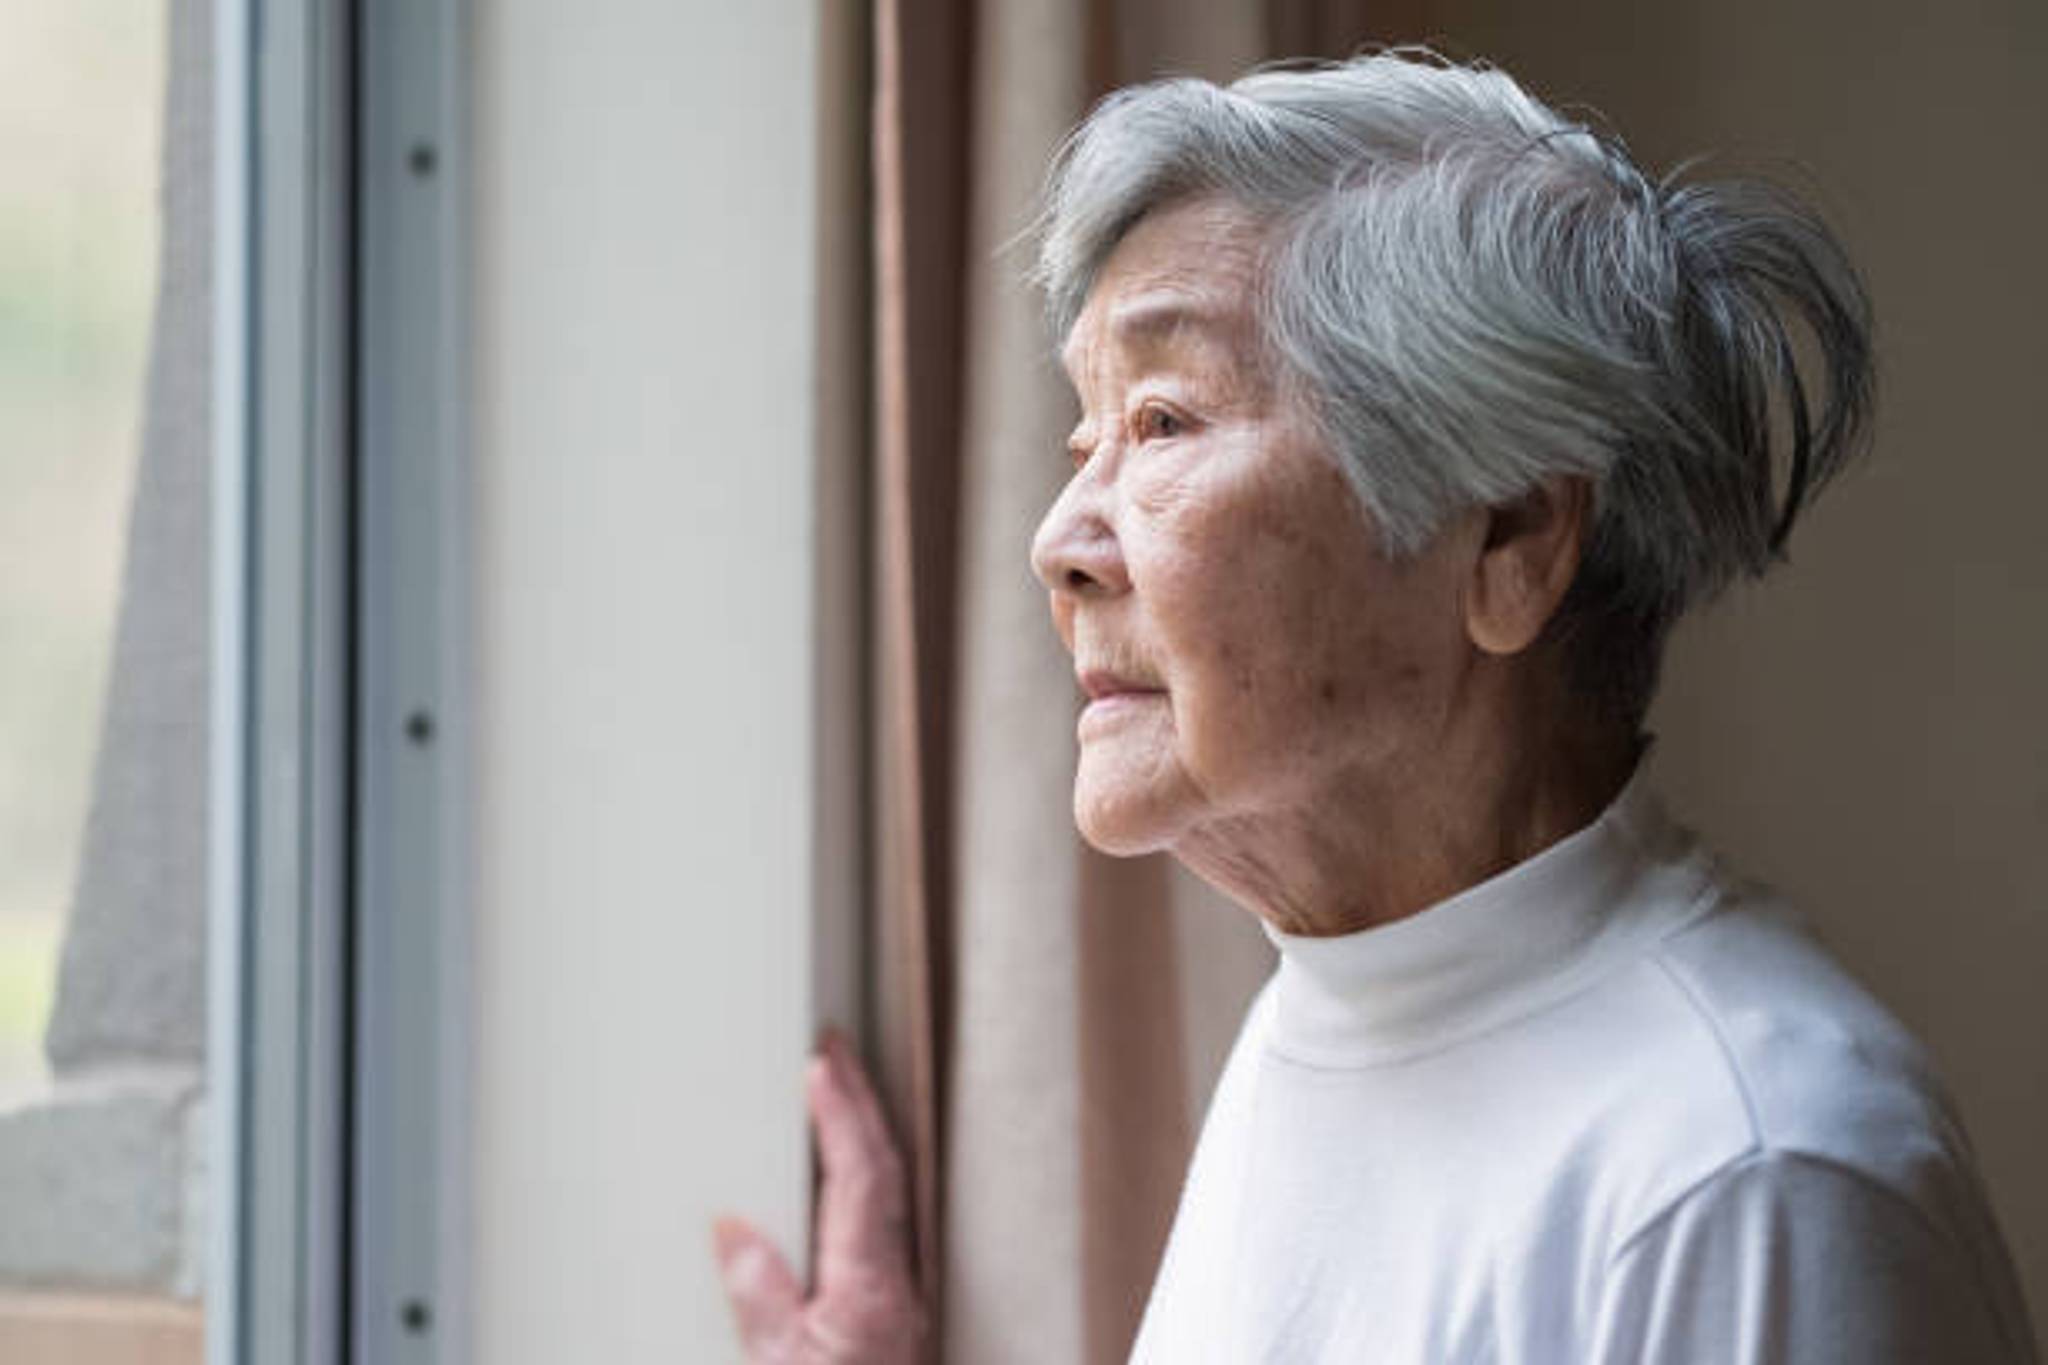 In-home care combats loneliness among Older Adults